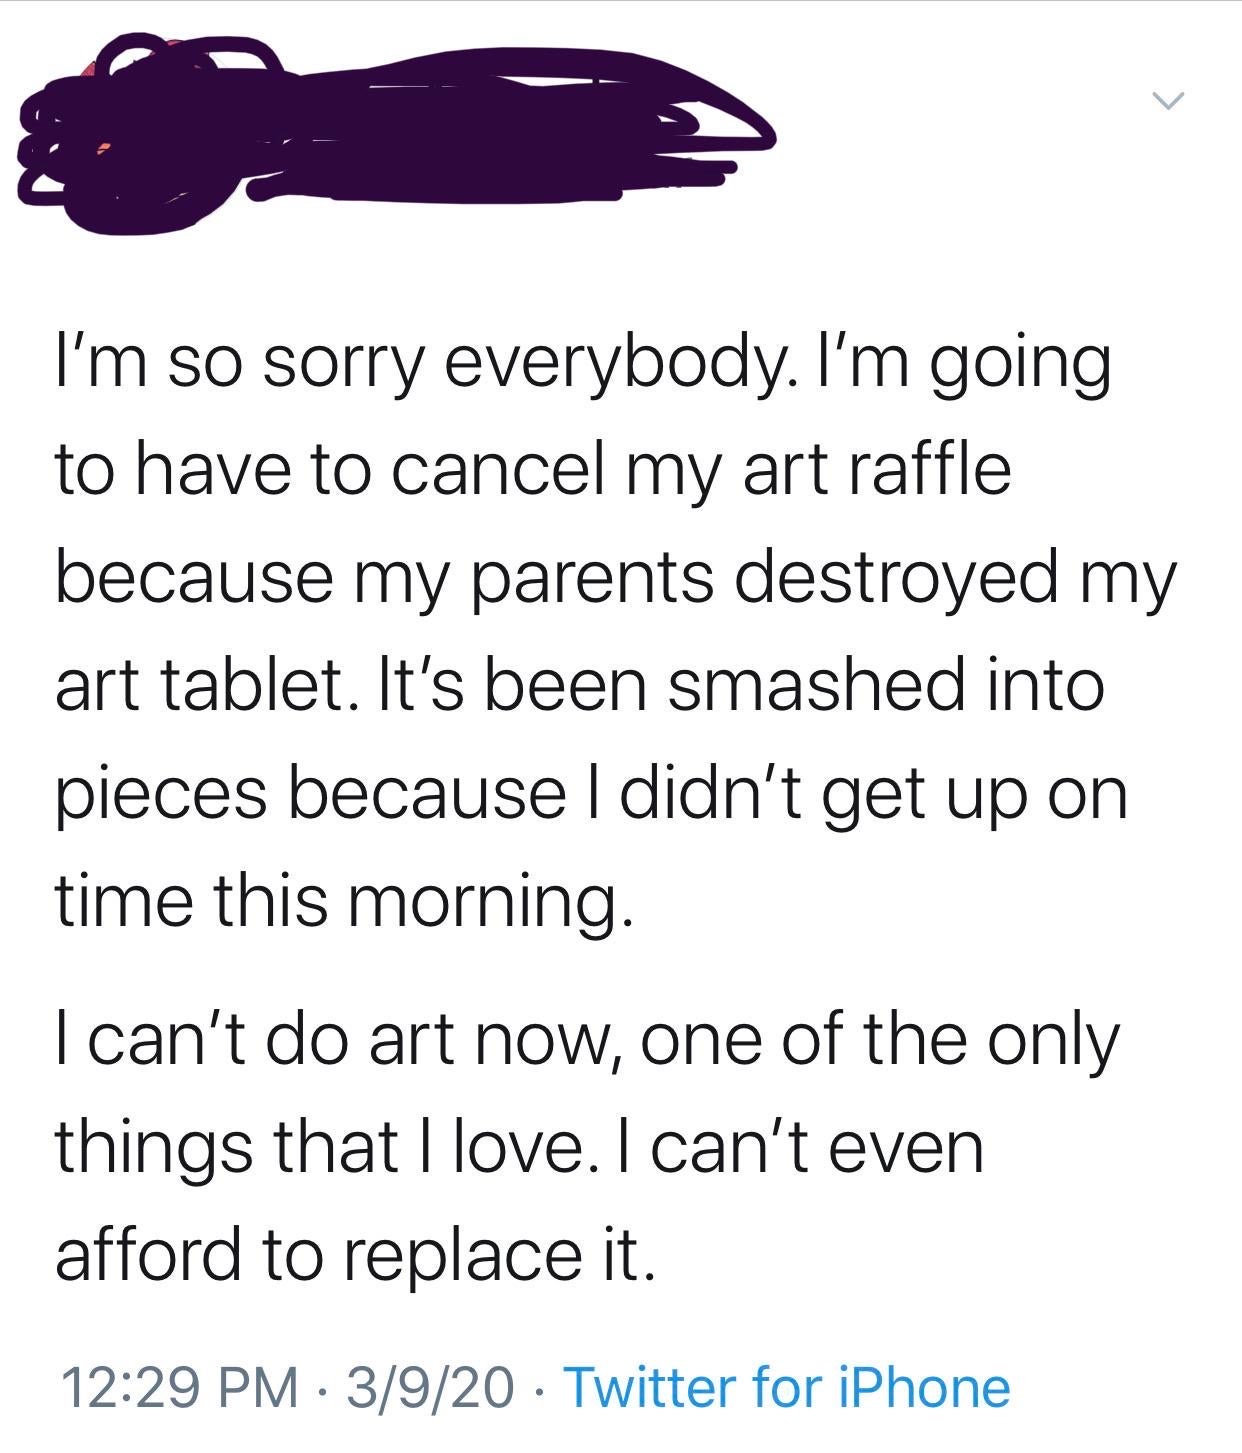 animal - I'm so sorry everybody. I'm going to have to cancel my art raffle because my parents destroyed my art tablet. It's been smashed into pieces because I didn't get up on time this morning. I can't do art now, one of the only things that I love. I ca